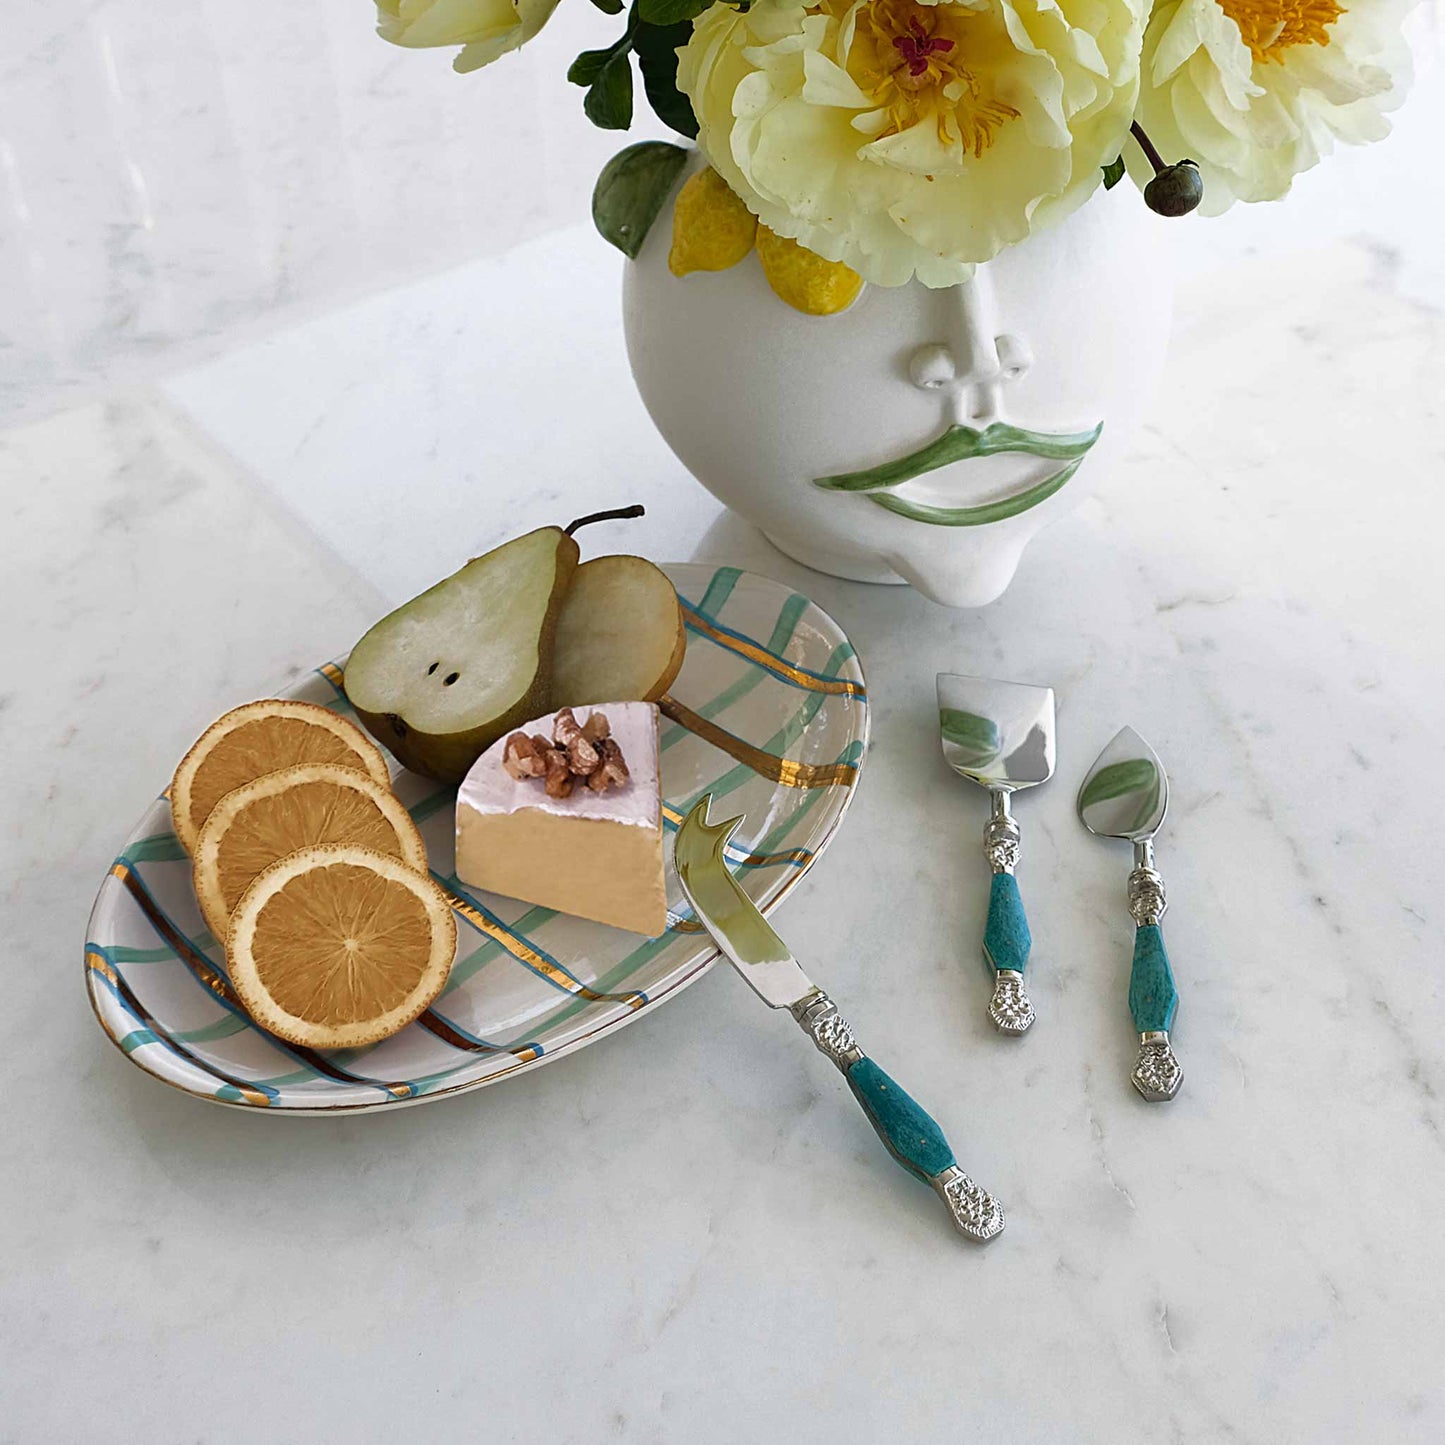 ZA Collective 3 Piece Turquoise Cheese Knife Set